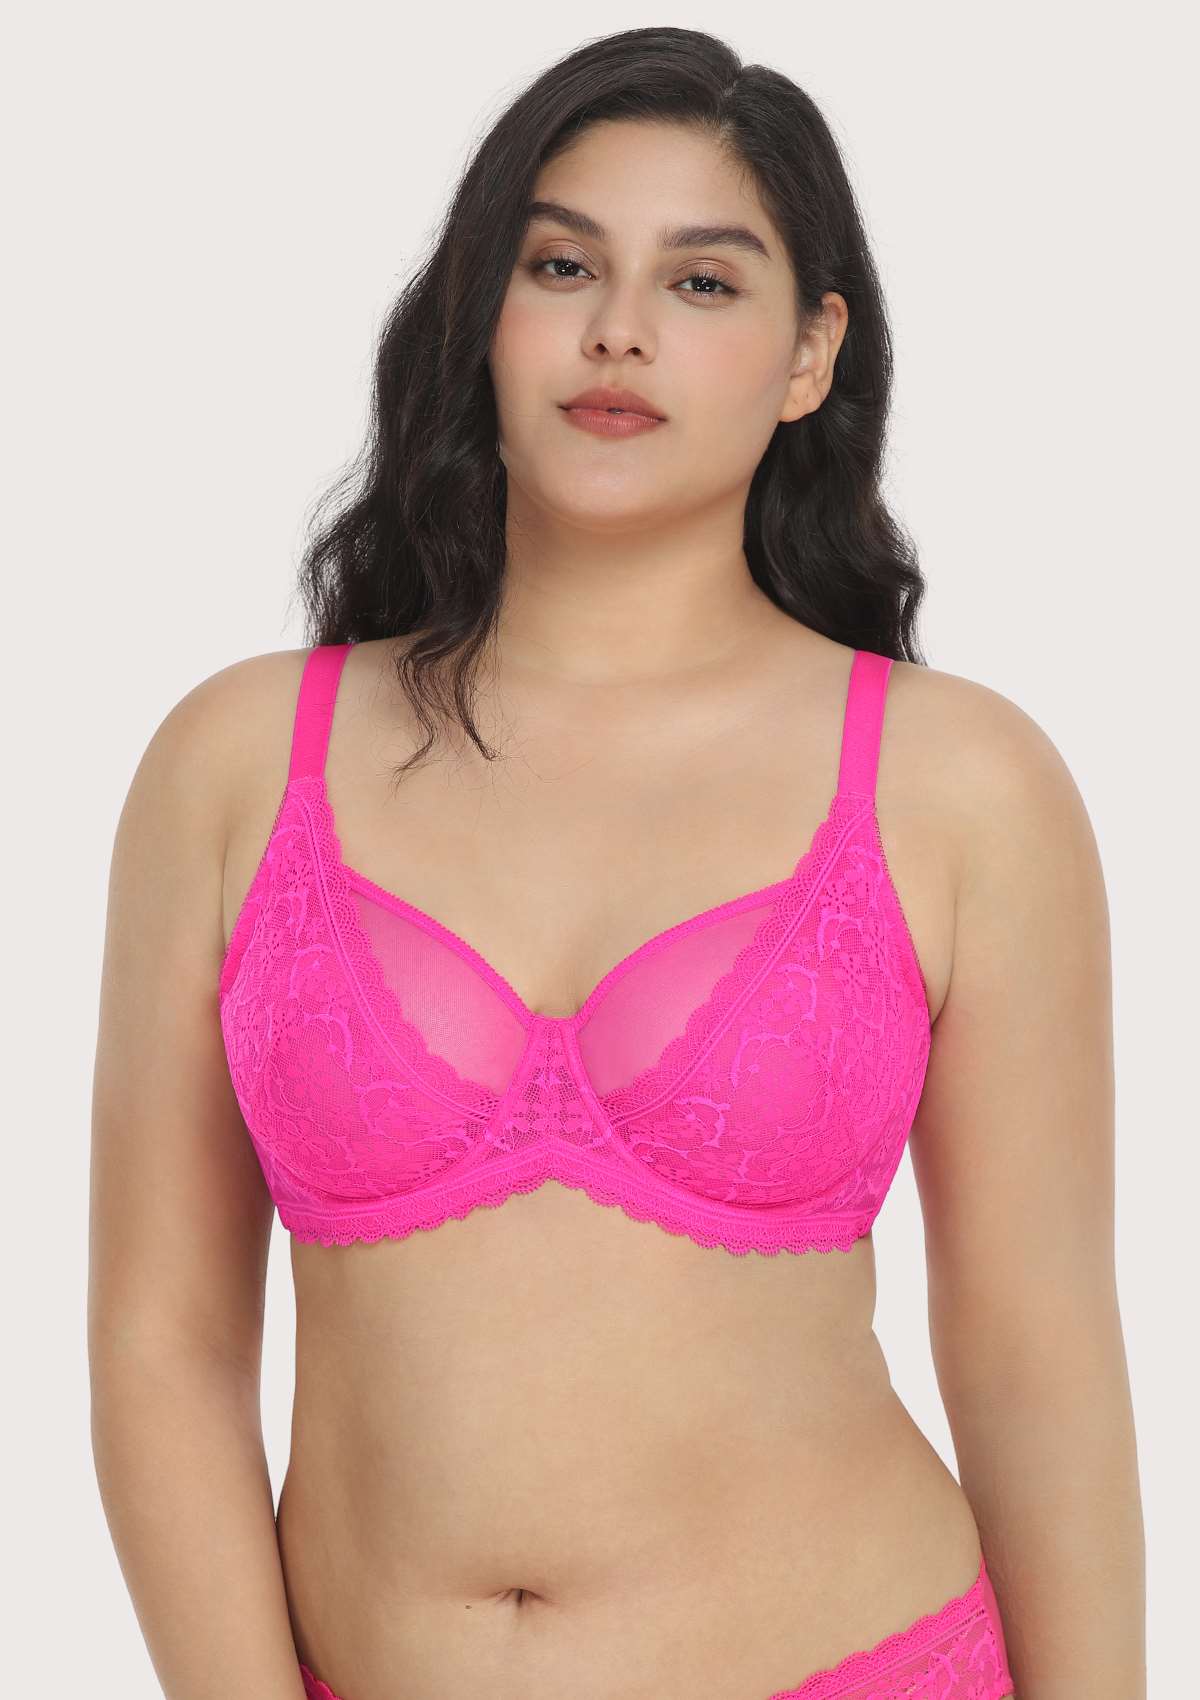 HSIA Anemone Lace Unlined Bra: Supportive, Lightweight Bra - Ginger / 36 / DDD/F